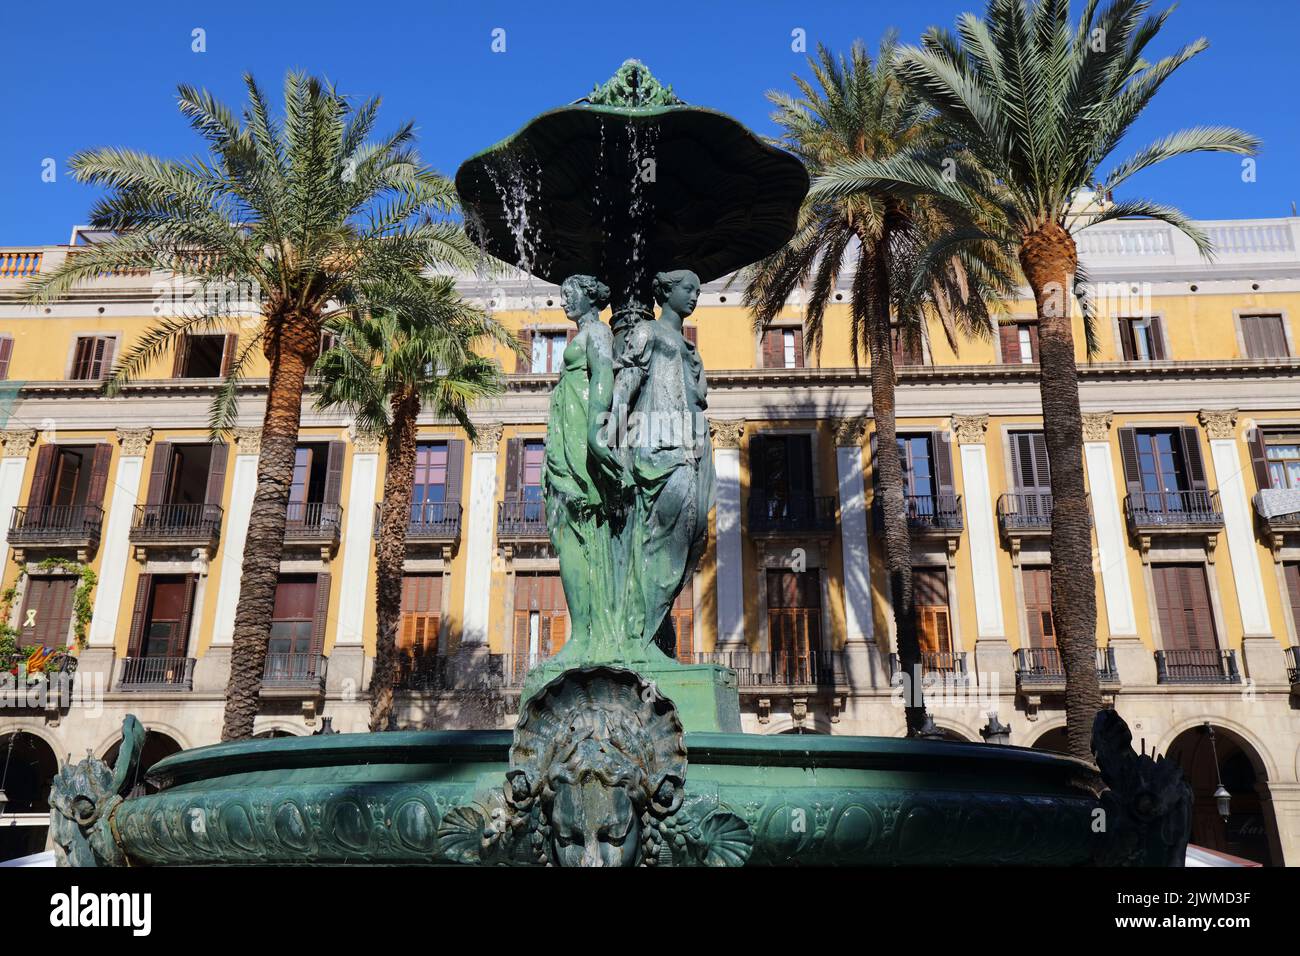 Placa Reial landmark town square with palm trees in Barri Gotic district of Barcelona, Spain. Stock Photo